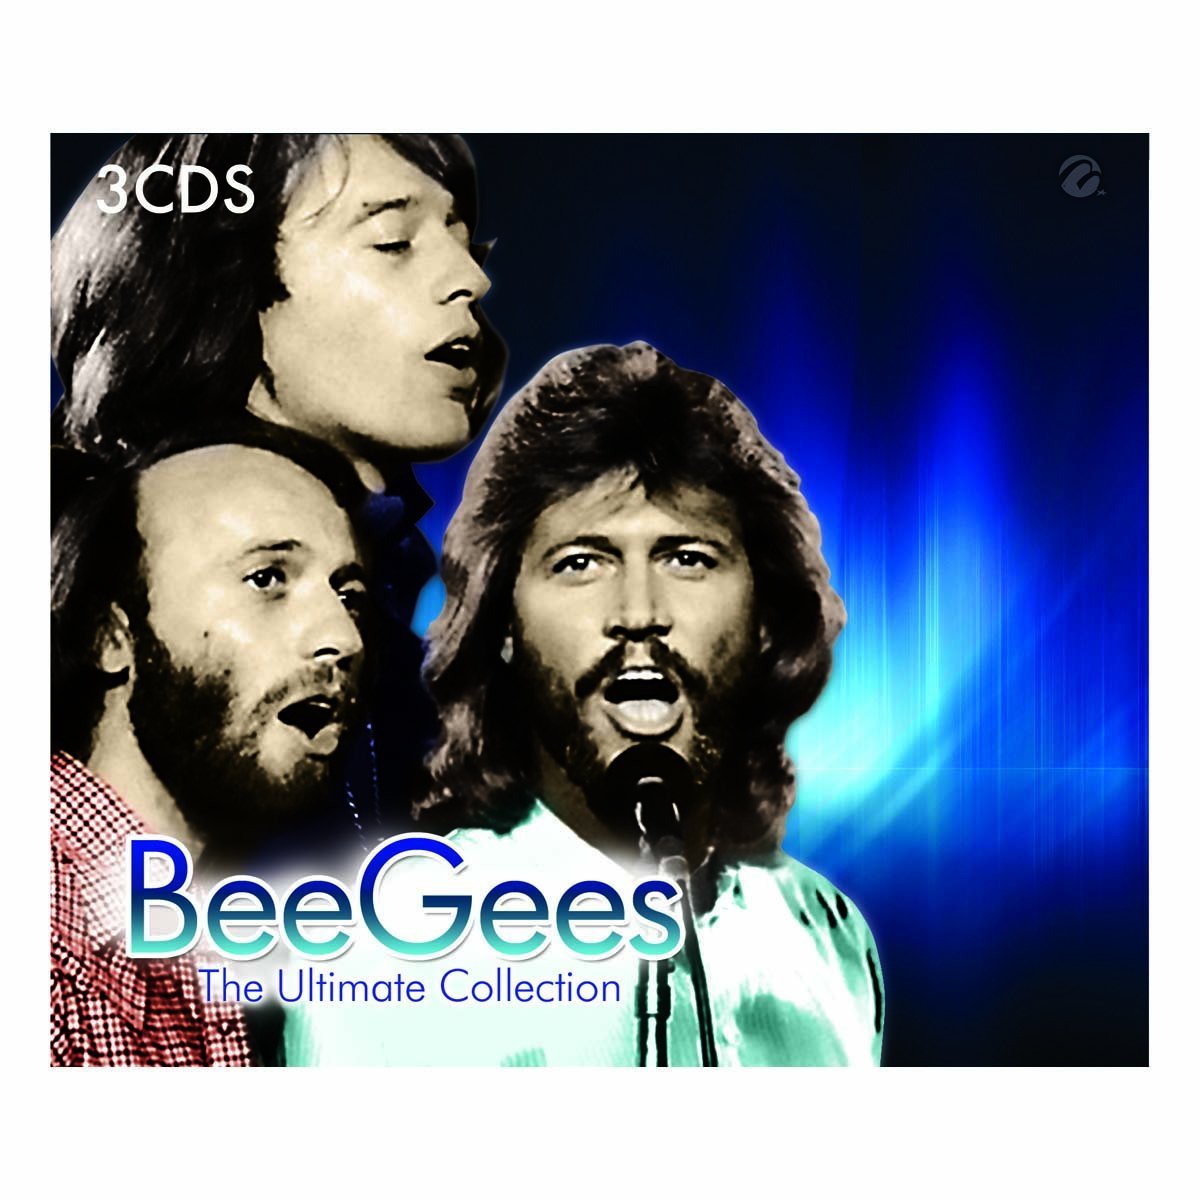 3 Cds Bee Gees Bee Gees The Ultimate Collection